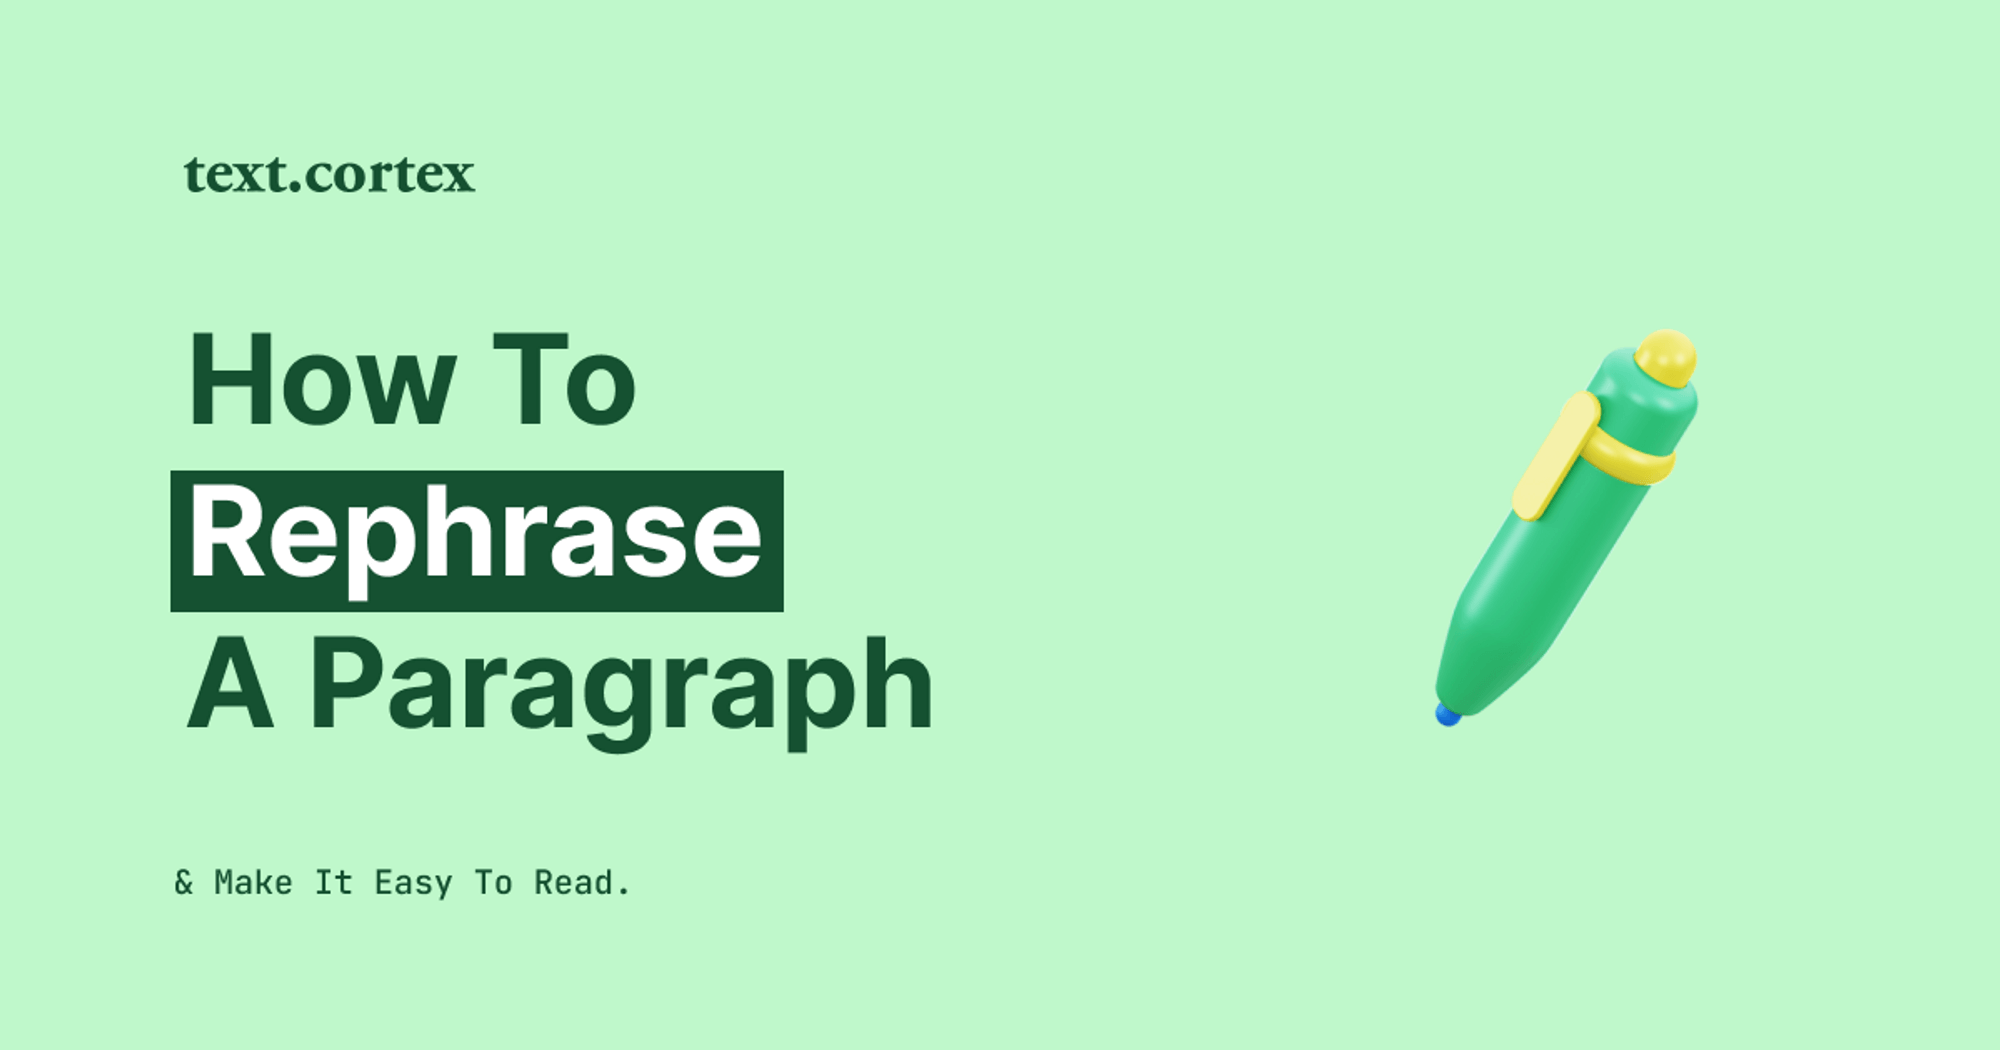 How To Rephrase a Paragraph & Make It Easy To Read